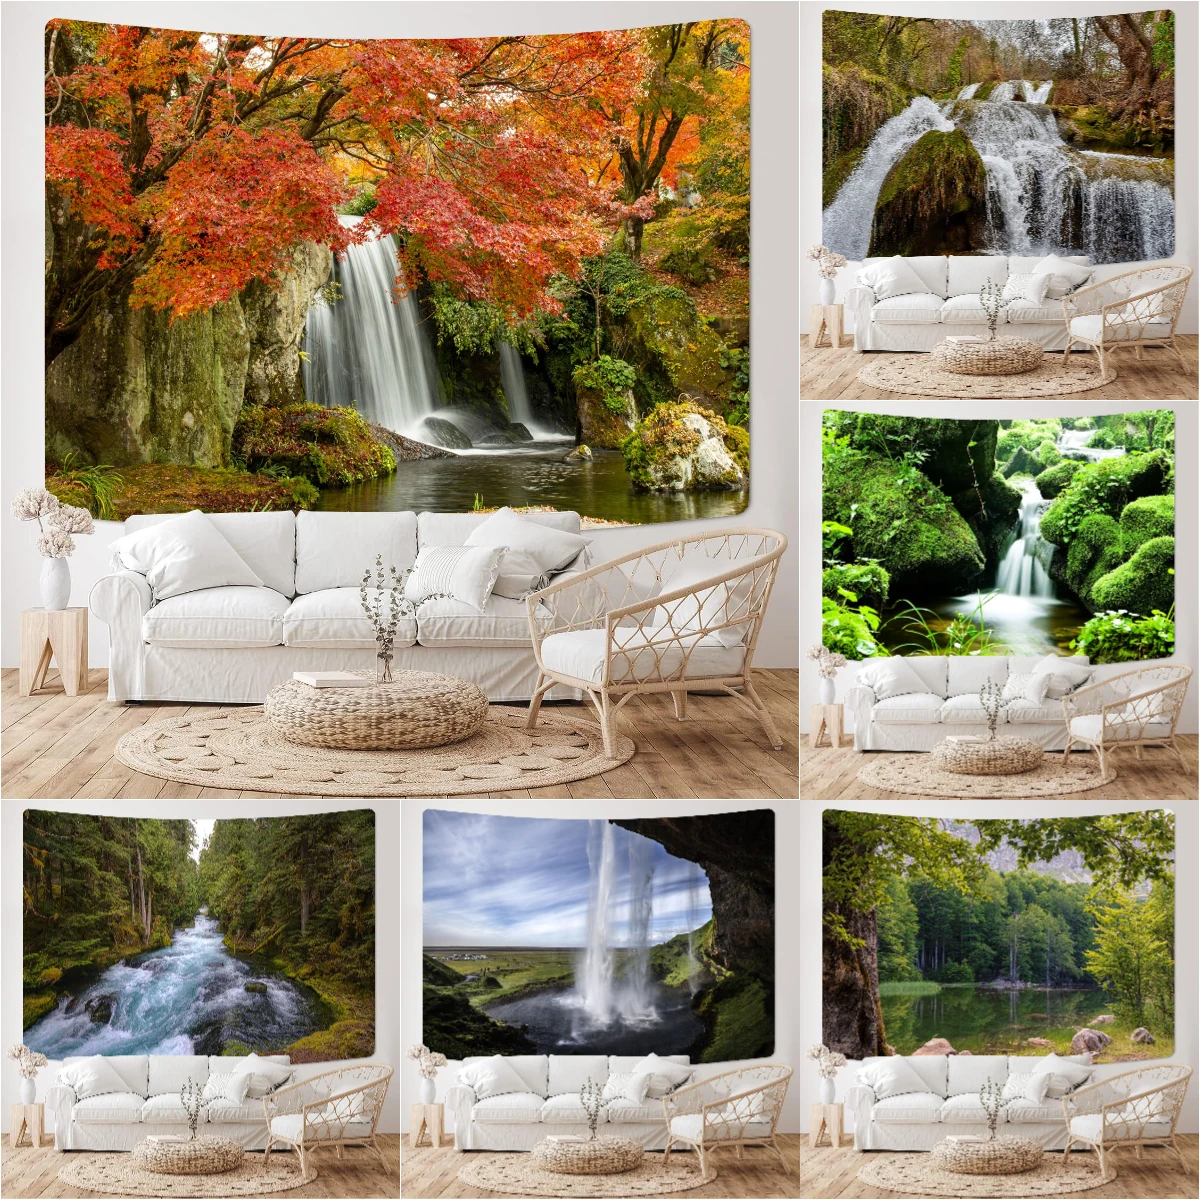 

Mountain Waterfall Tapestry Nature Scenery Tapestries Wall Hanging for Bedroom Aesthetic Room Decor Boho Home Decoration Cloth